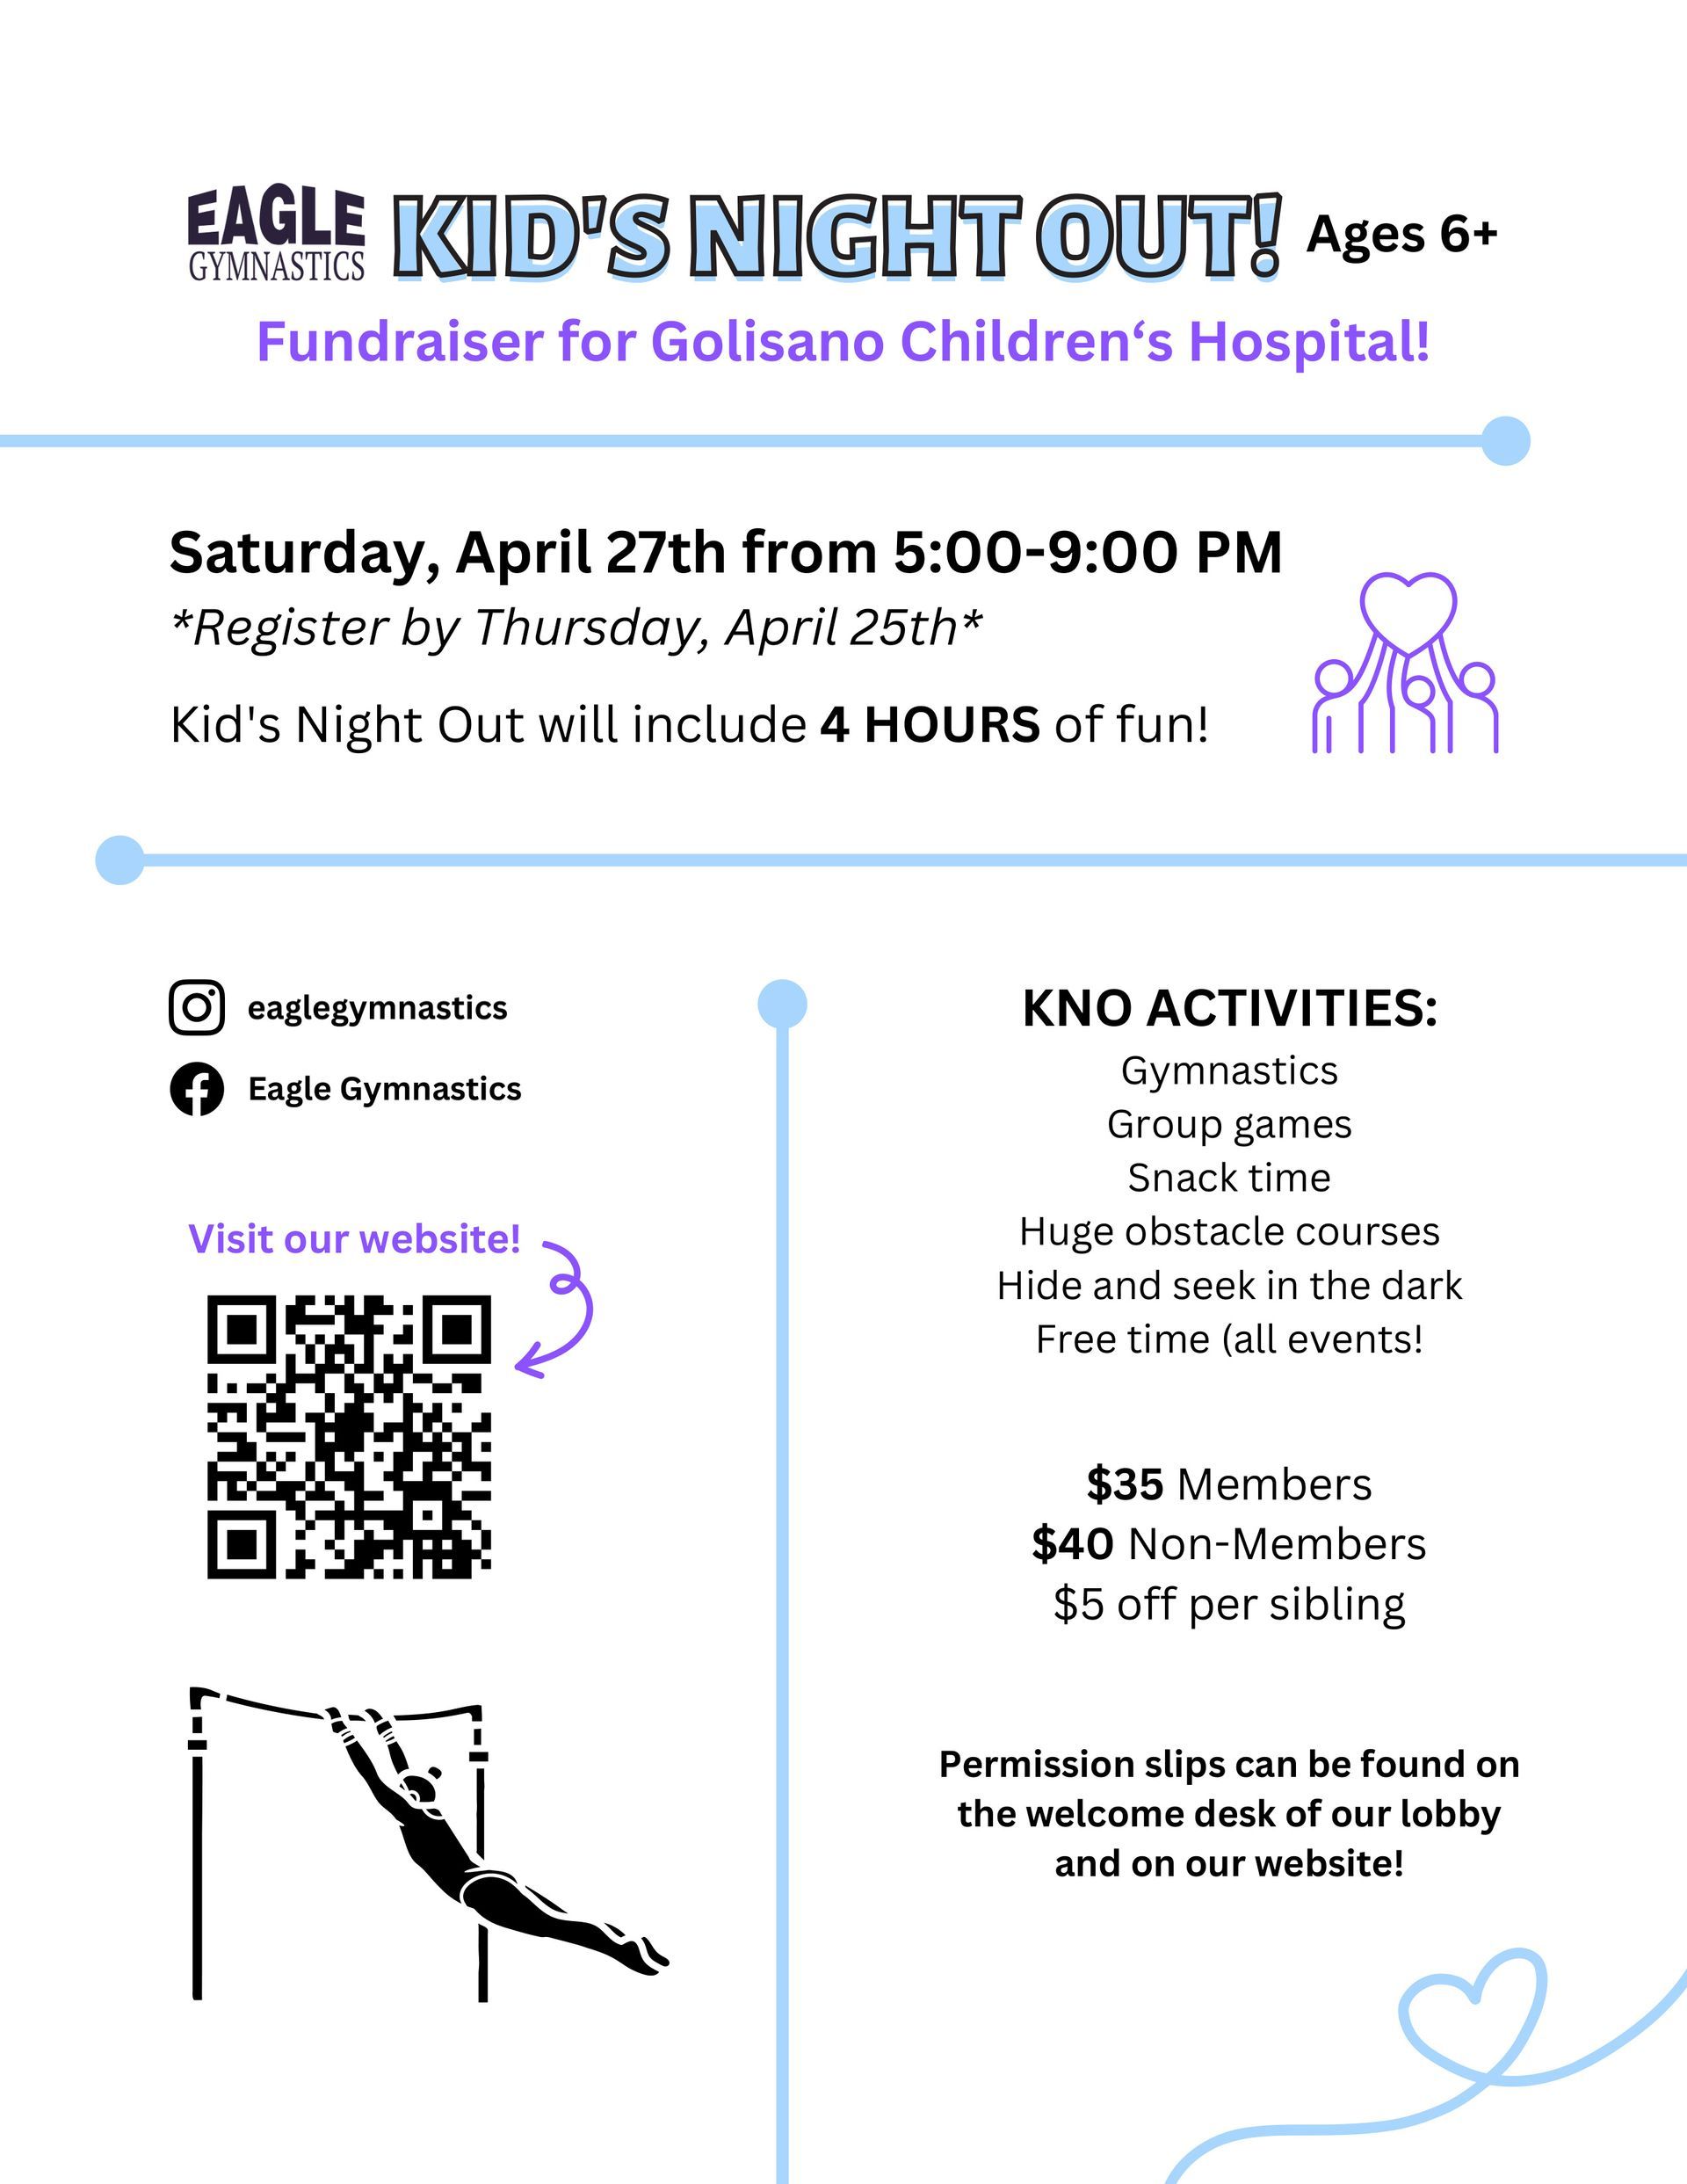 A poster for Eagle kid's Night Out, a fundraiser for Golisano Children's Hospital.